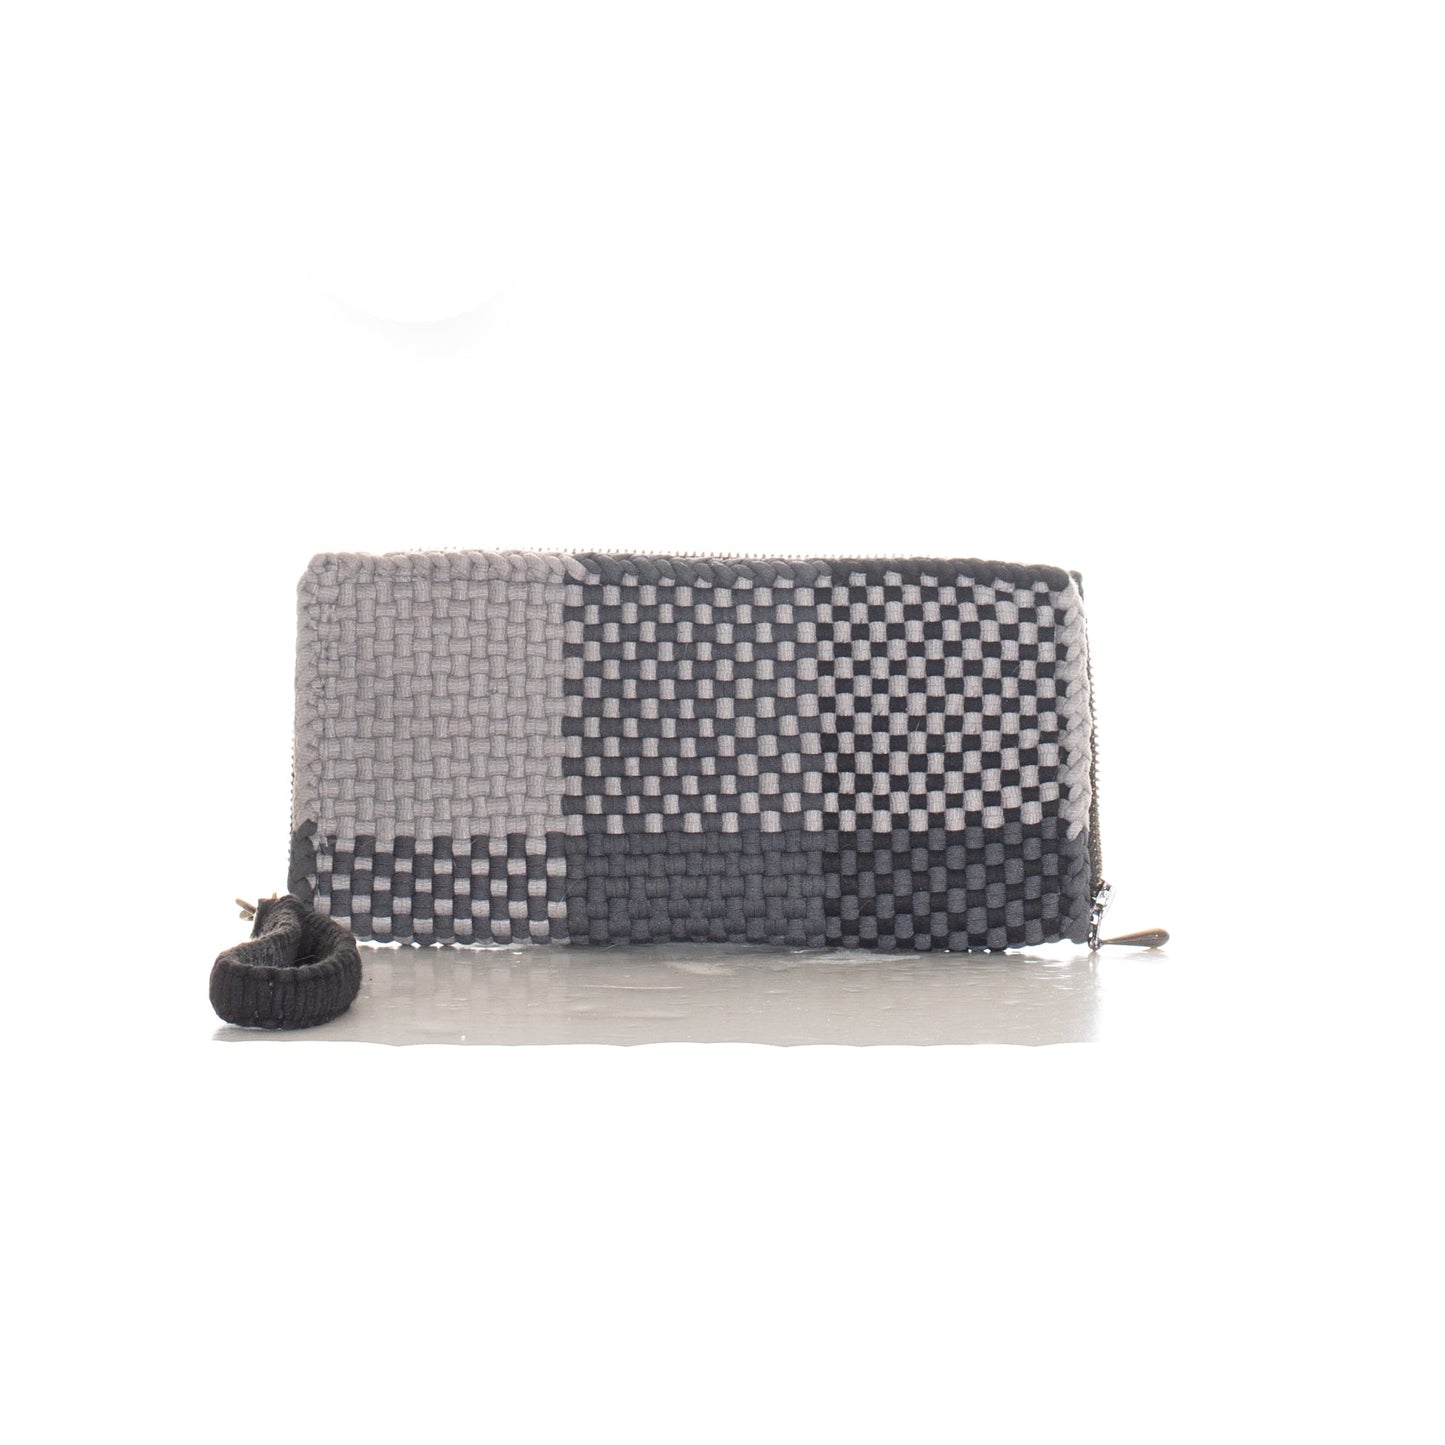 ARCHIVE SALE - NARRA ZIP WALLET - PHILIPPINES COLLECTION - TRI-TONE GREY - ITEM NO. 24040